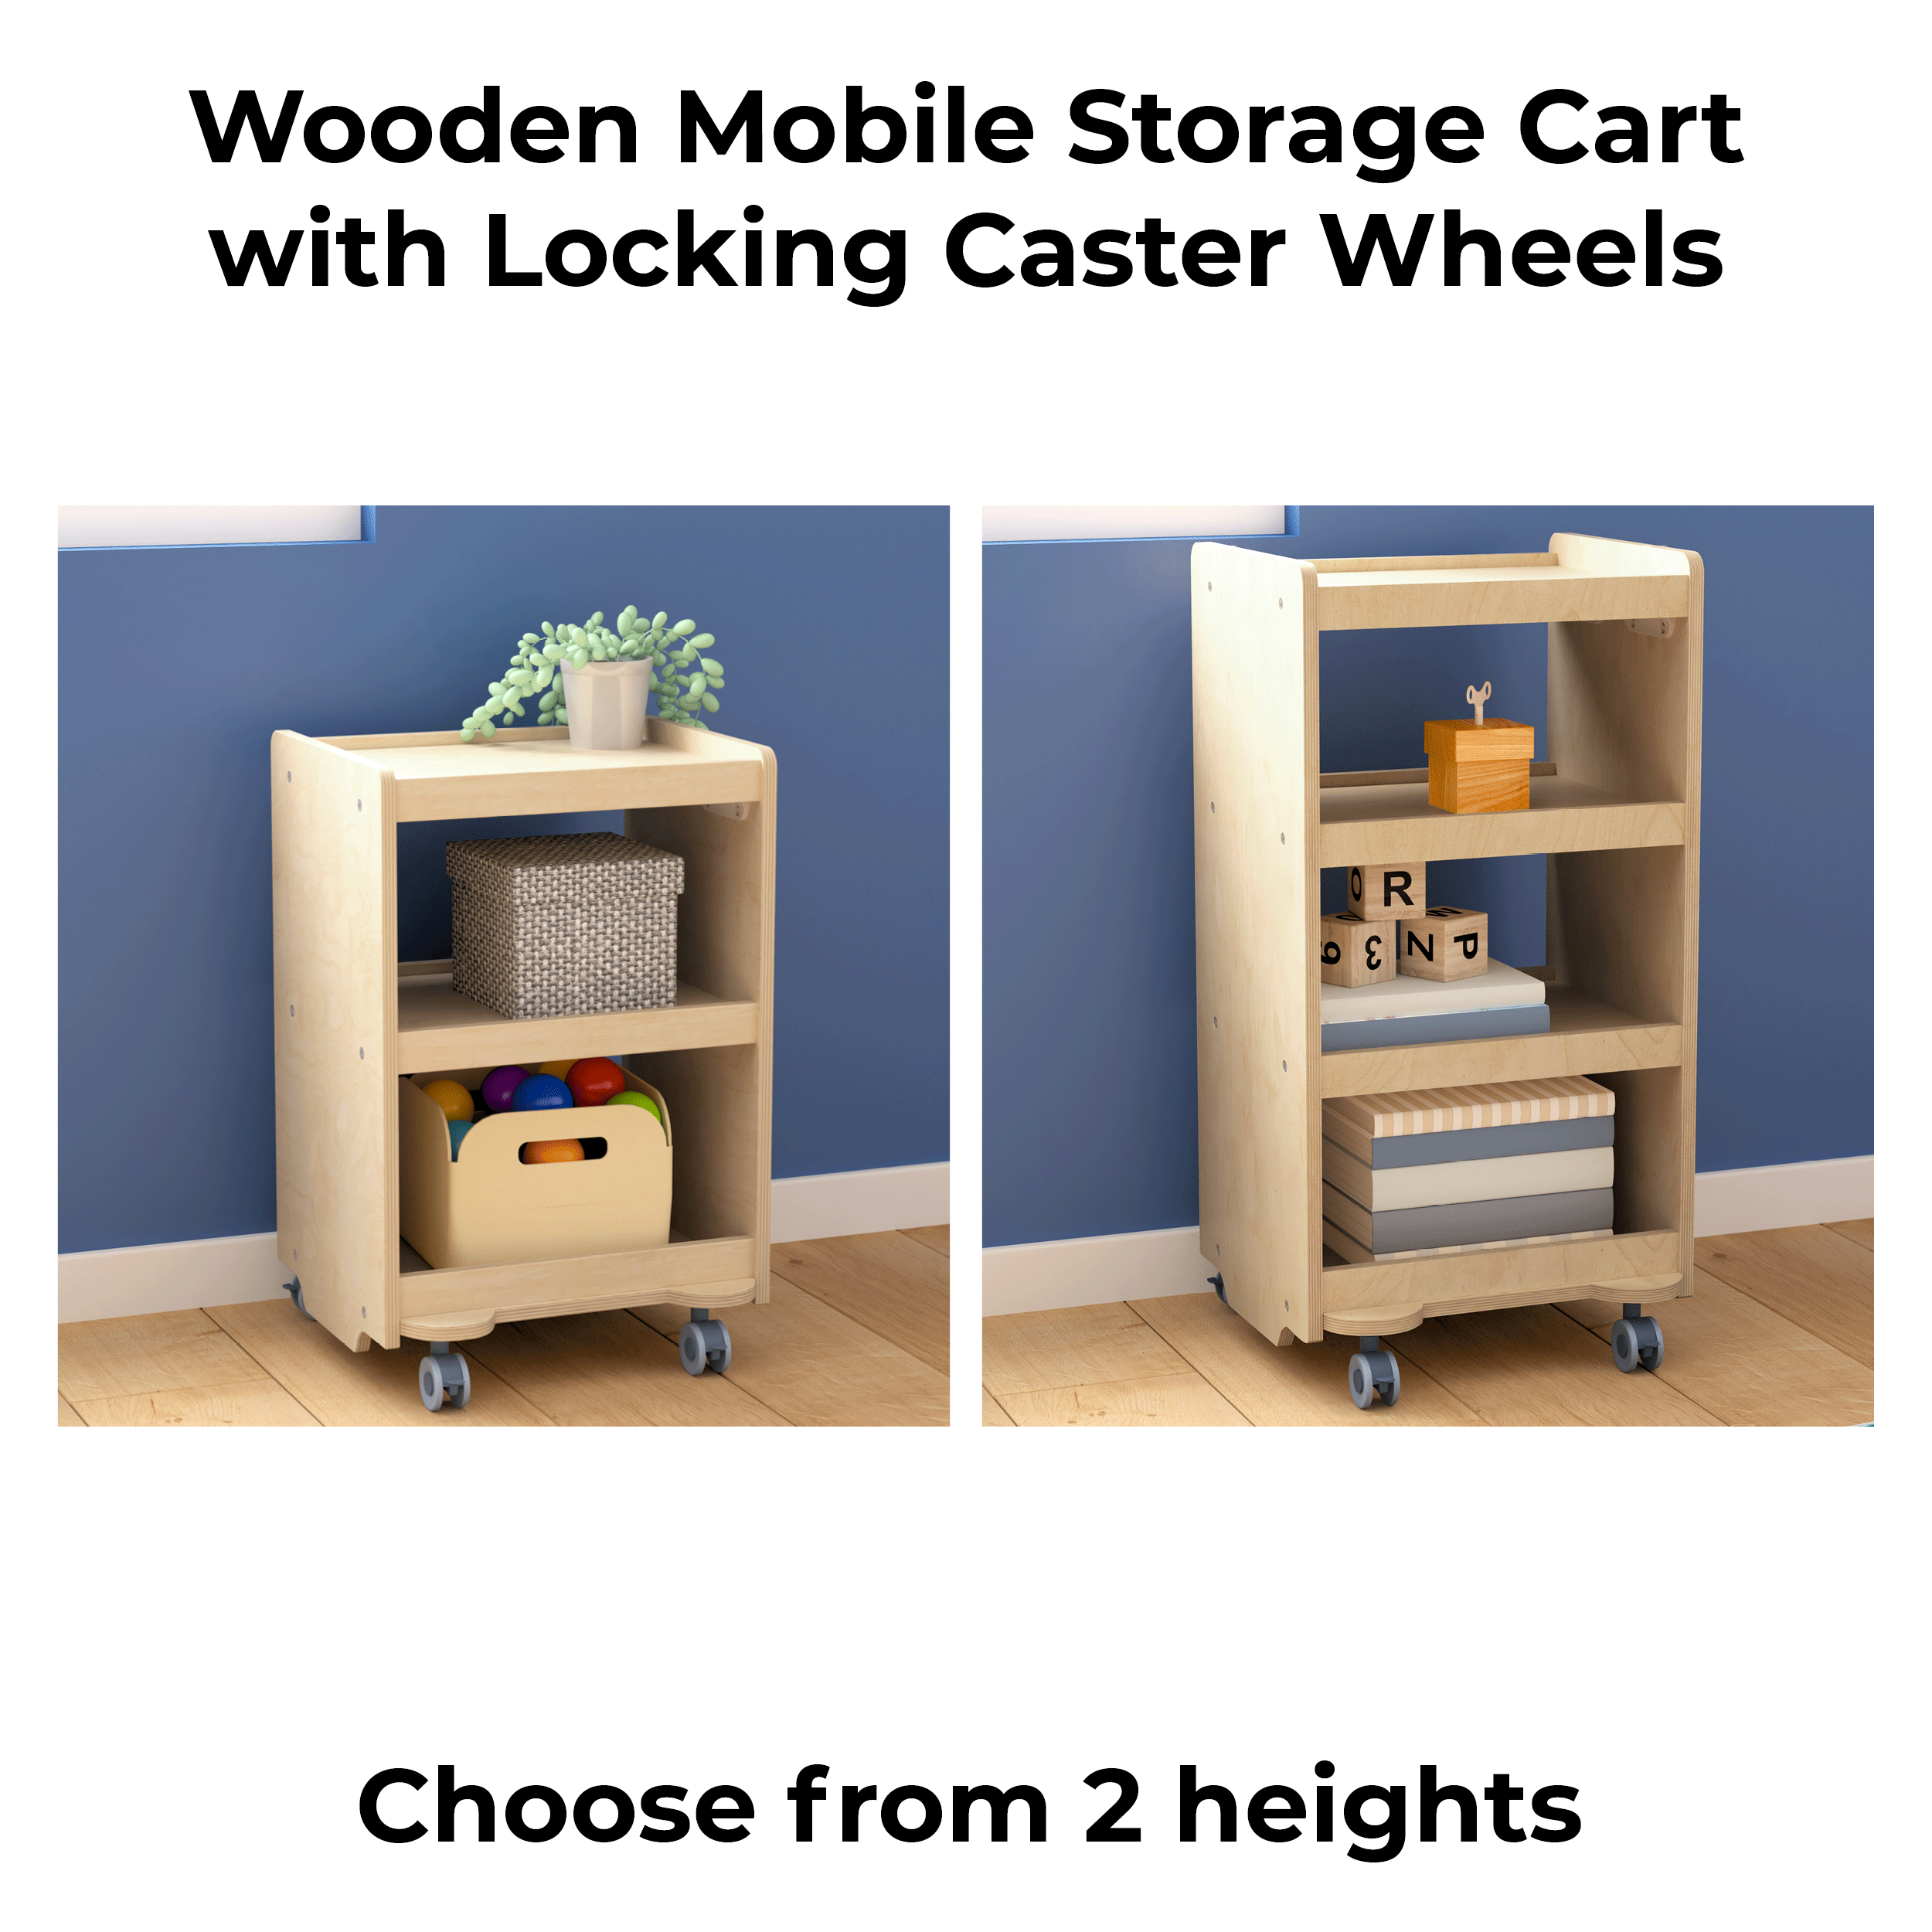 Wooden Mobile Storage Cart with Locking Caster Wheels